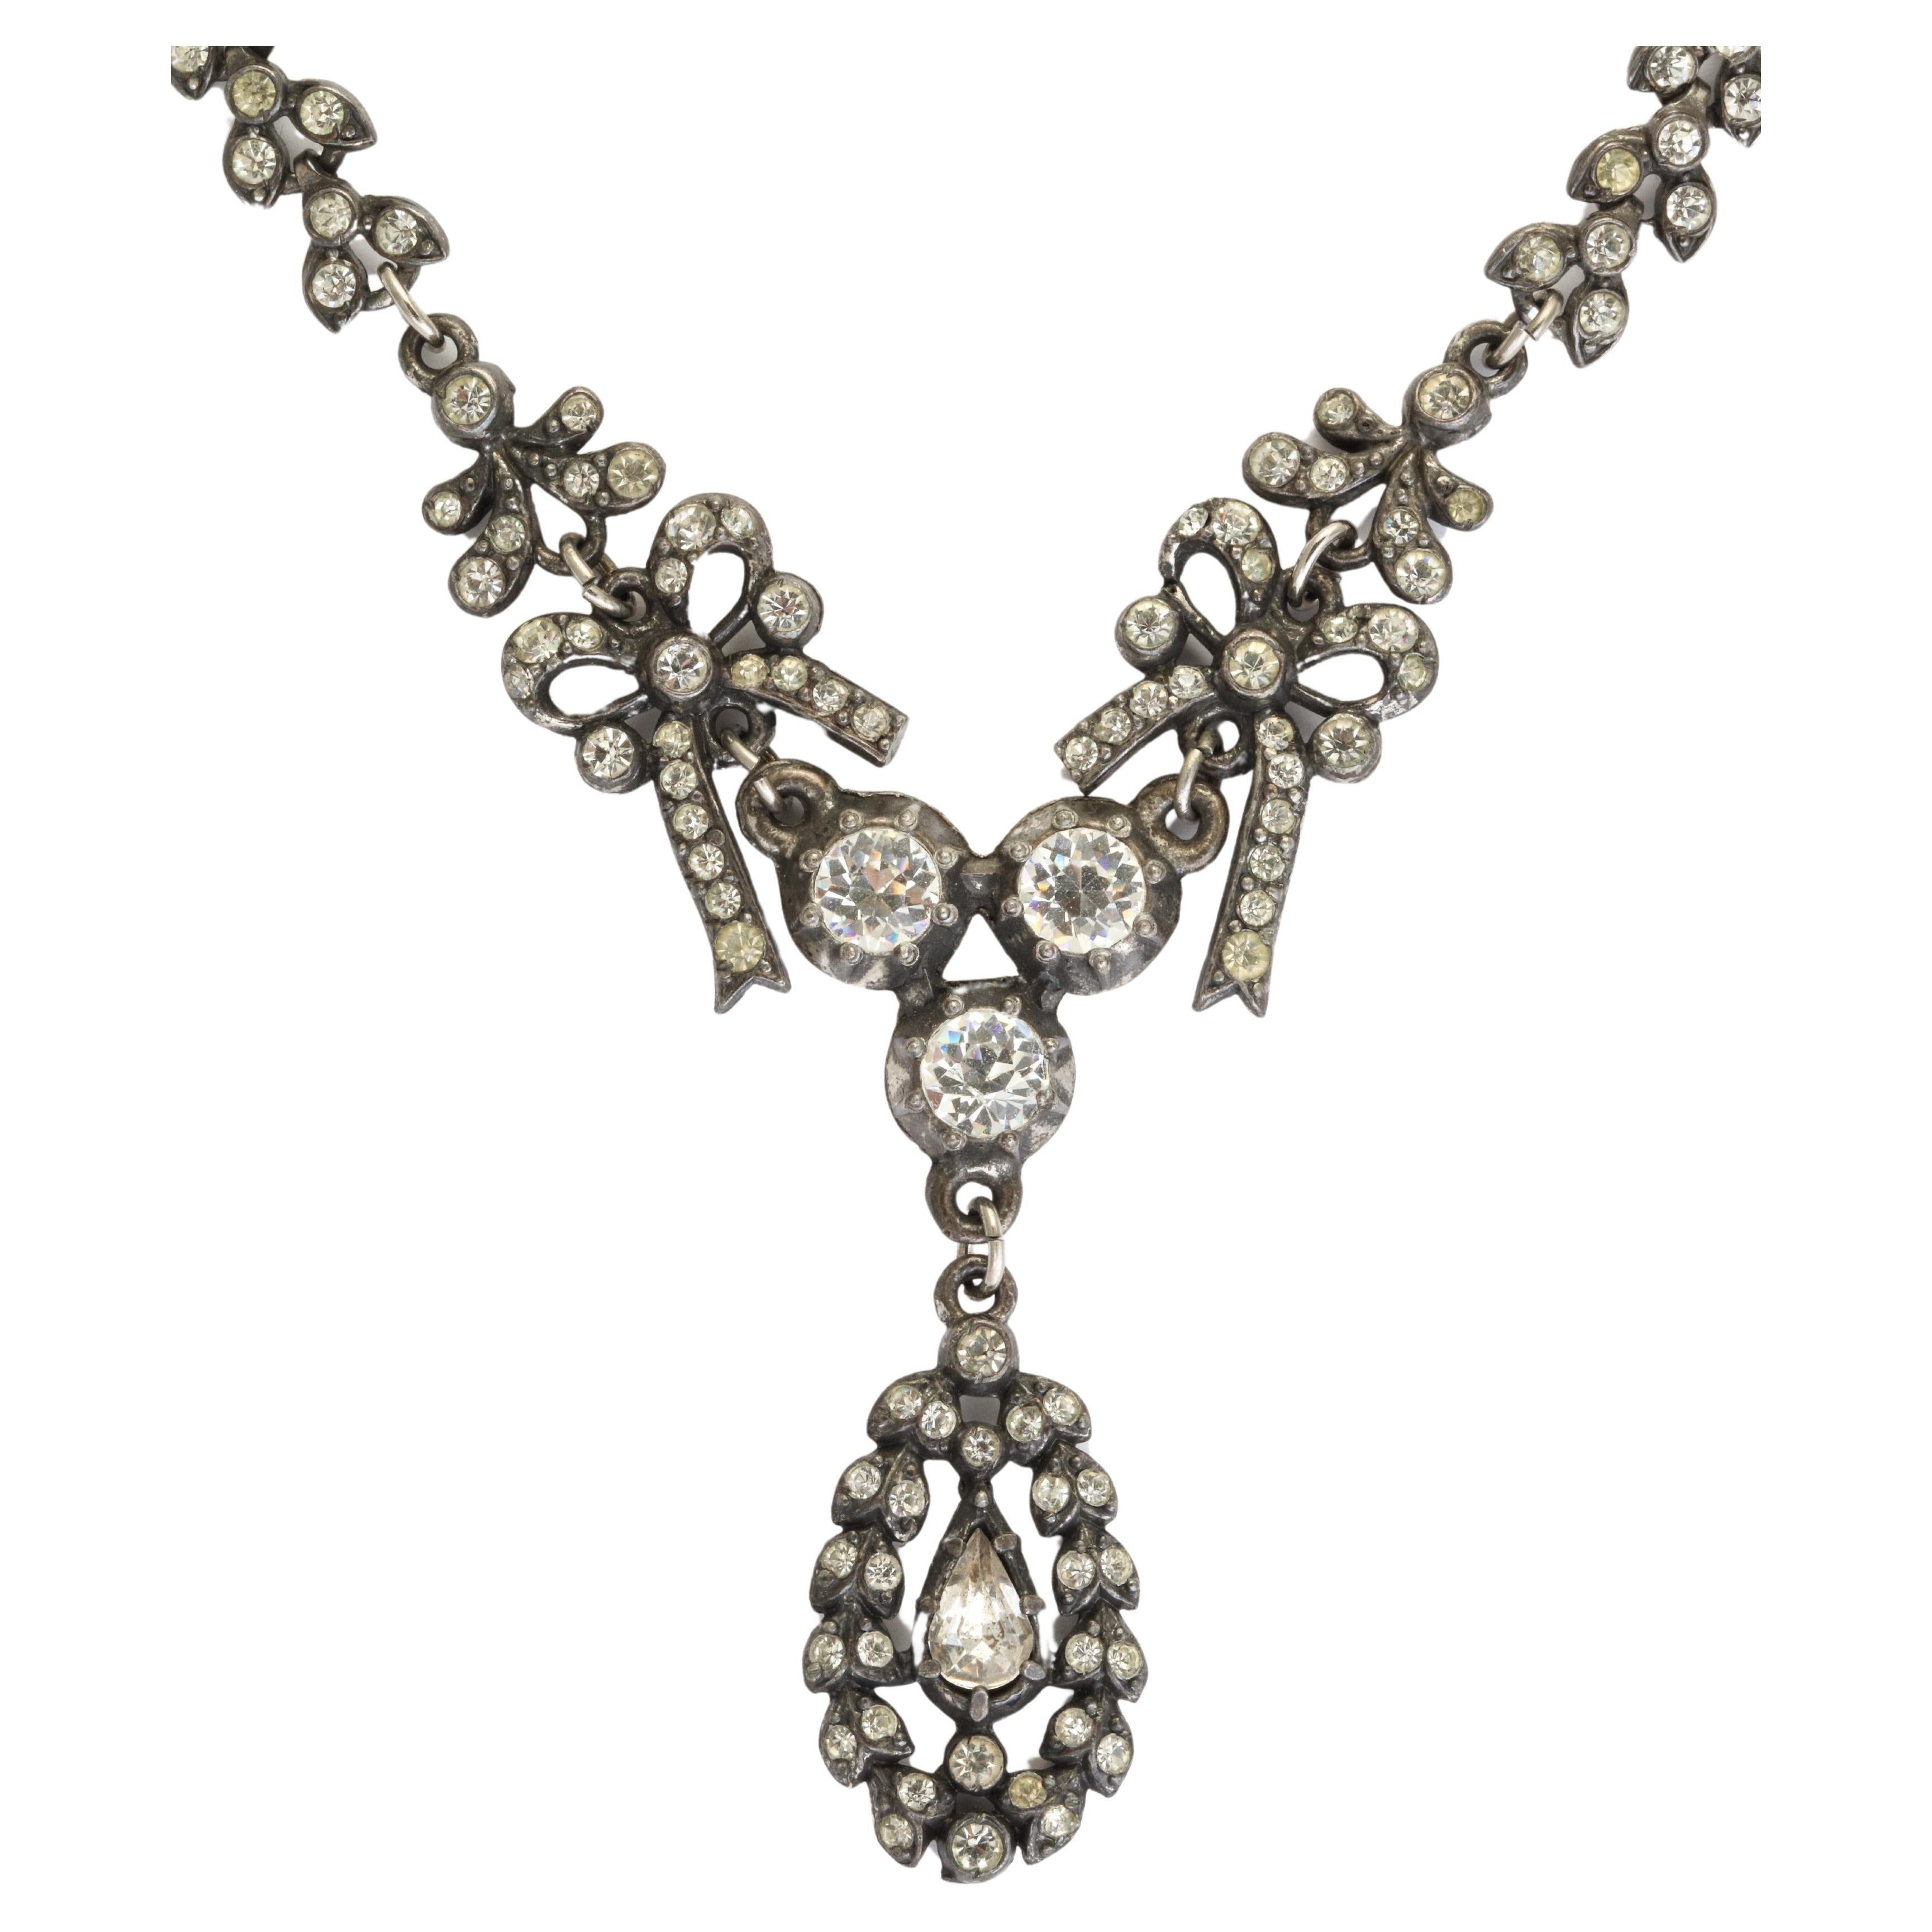 French Paste Necklace With Pendant and Bow Motif